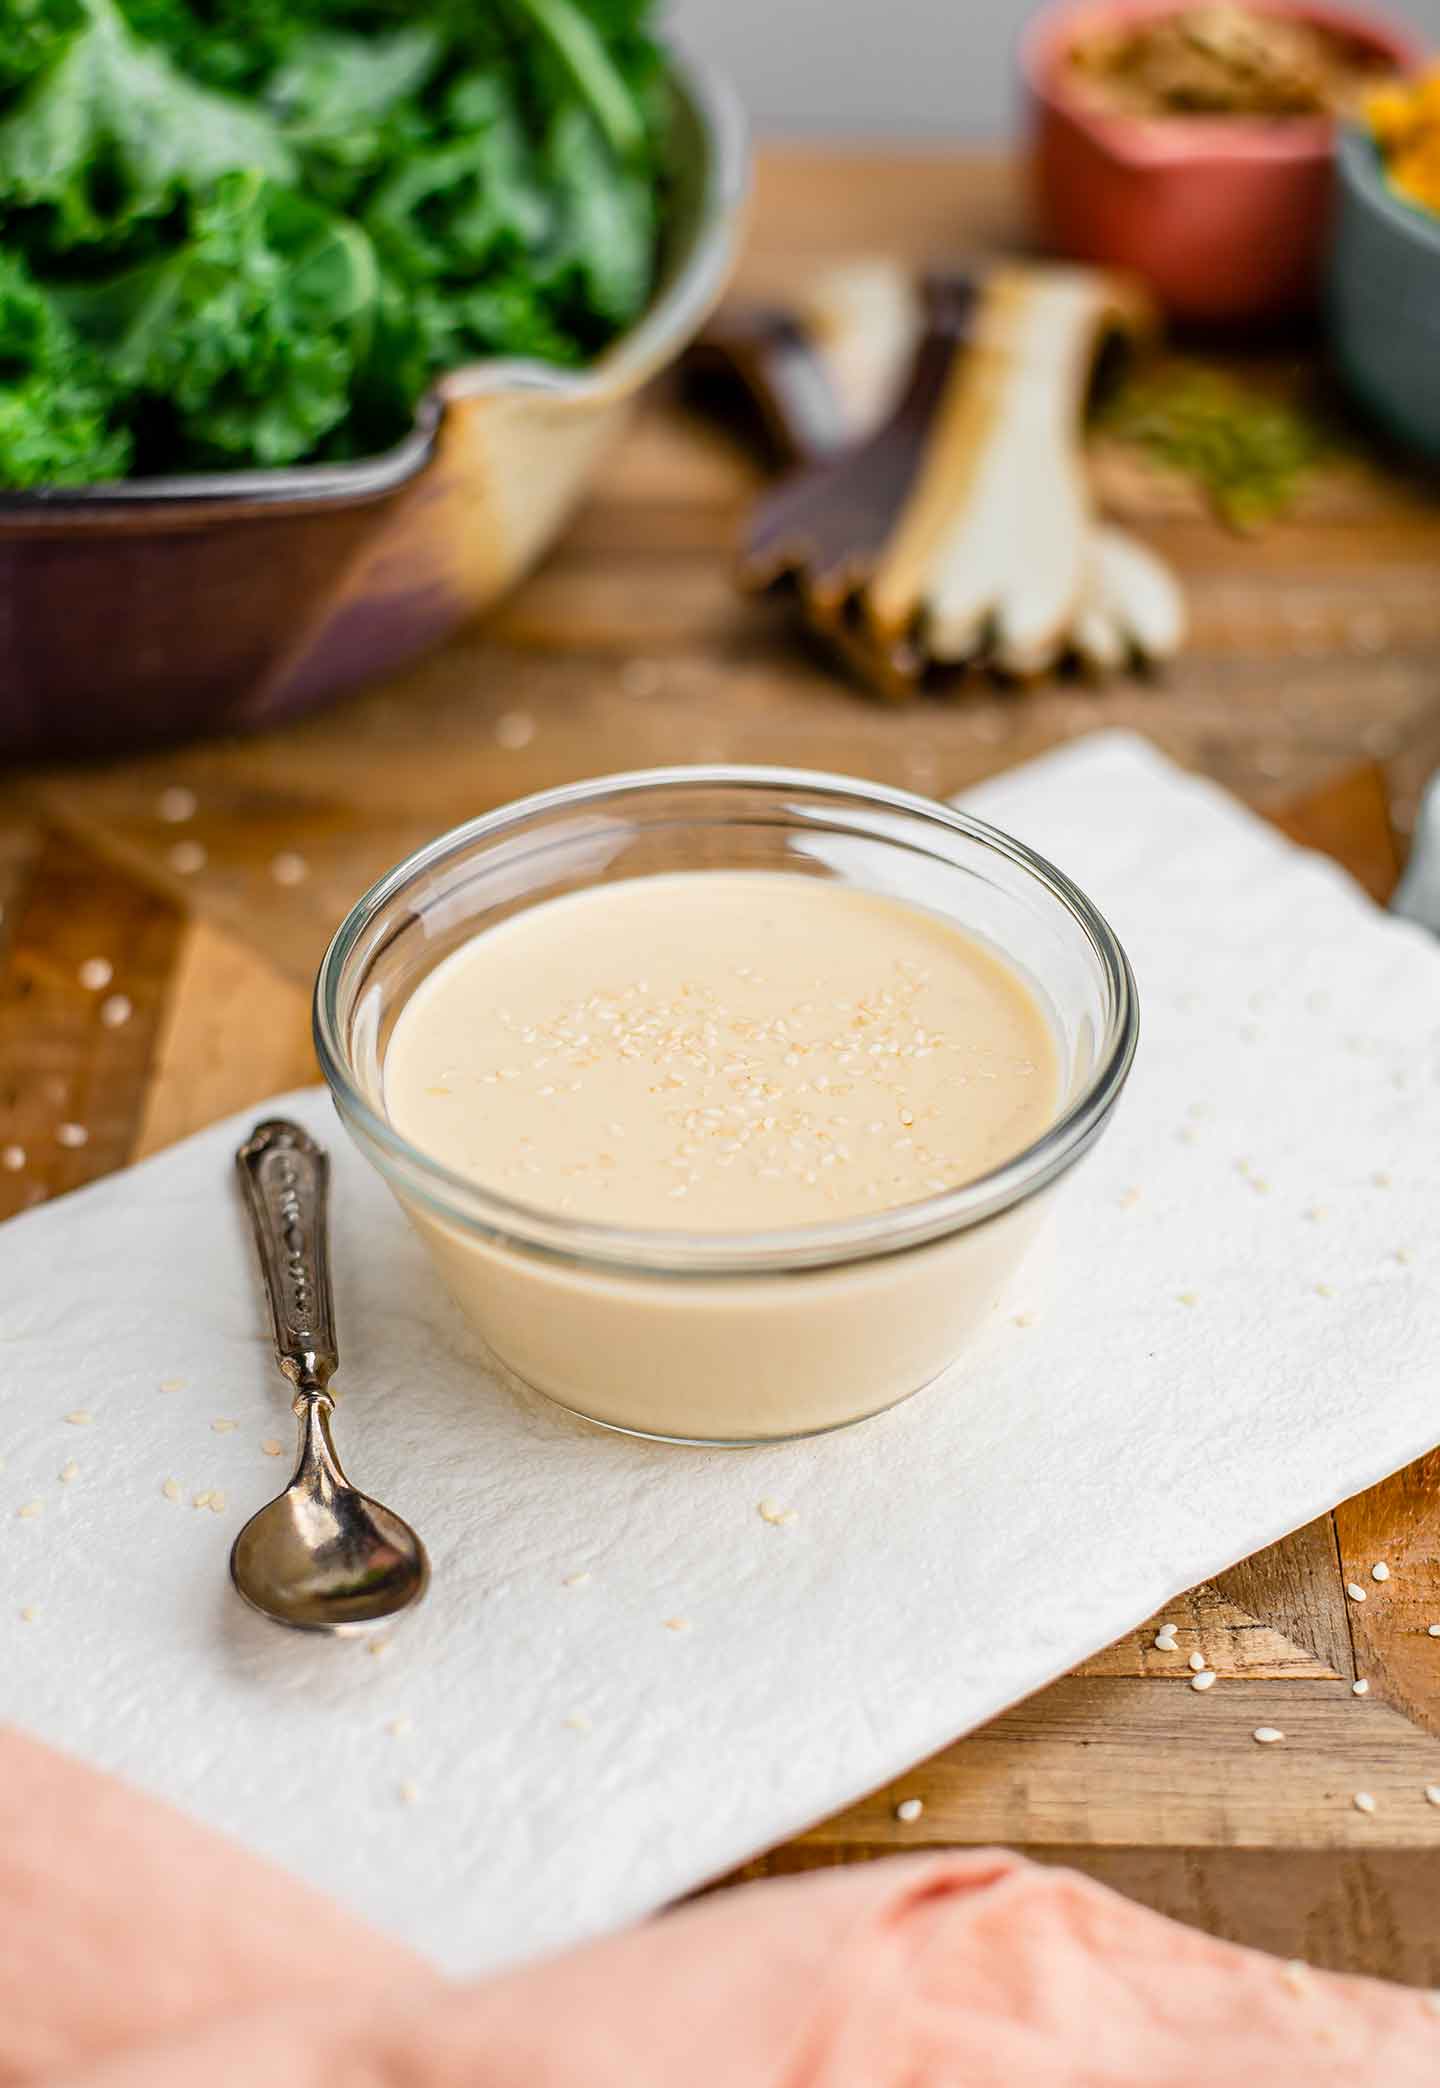 Side view of a thick lemon tahini dressing garnished with sesame seeds filling a small bowl on a white tray. Kale leaves and ingredients for making a salad fill the background.